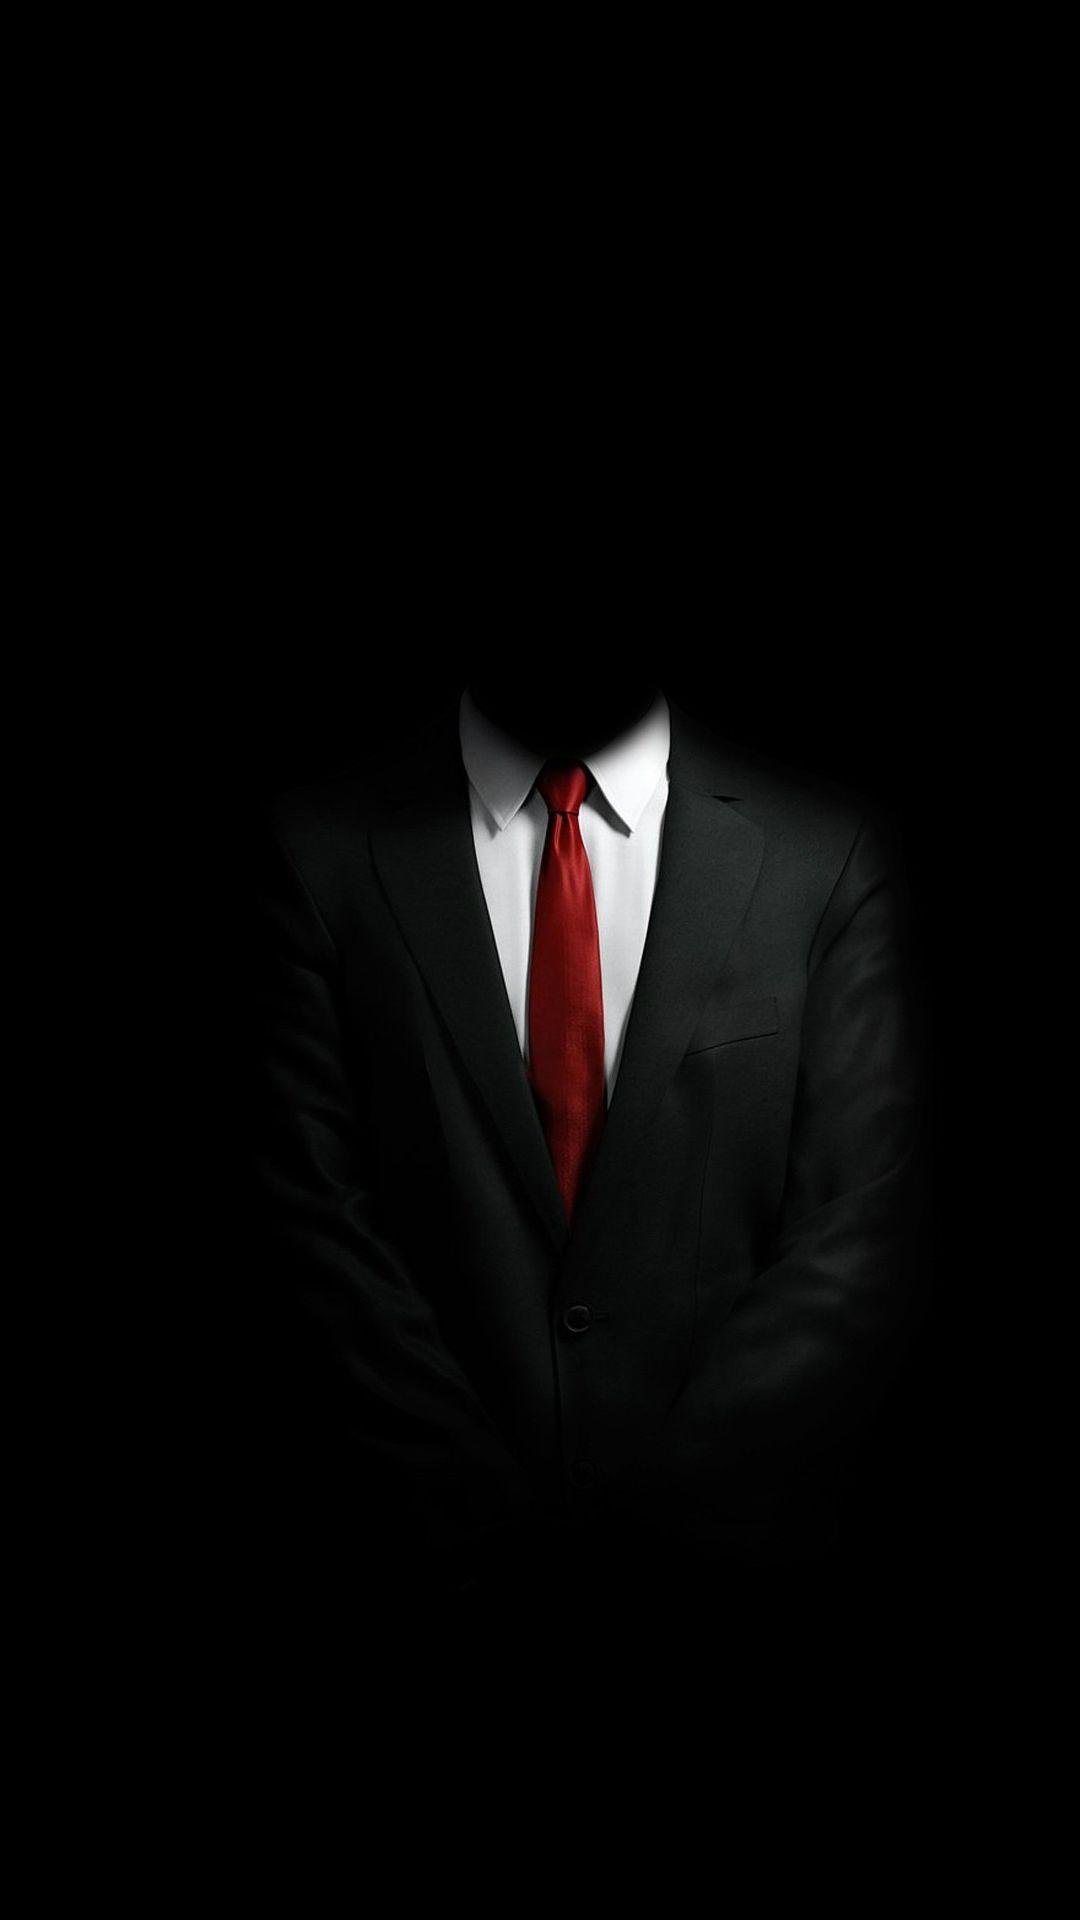 Mystery Man In Suit #iPhone #plus# #Wallpaper. Phone wallpaper for men, iPhone 5s wallpaper, iPhone 7 wallpaper